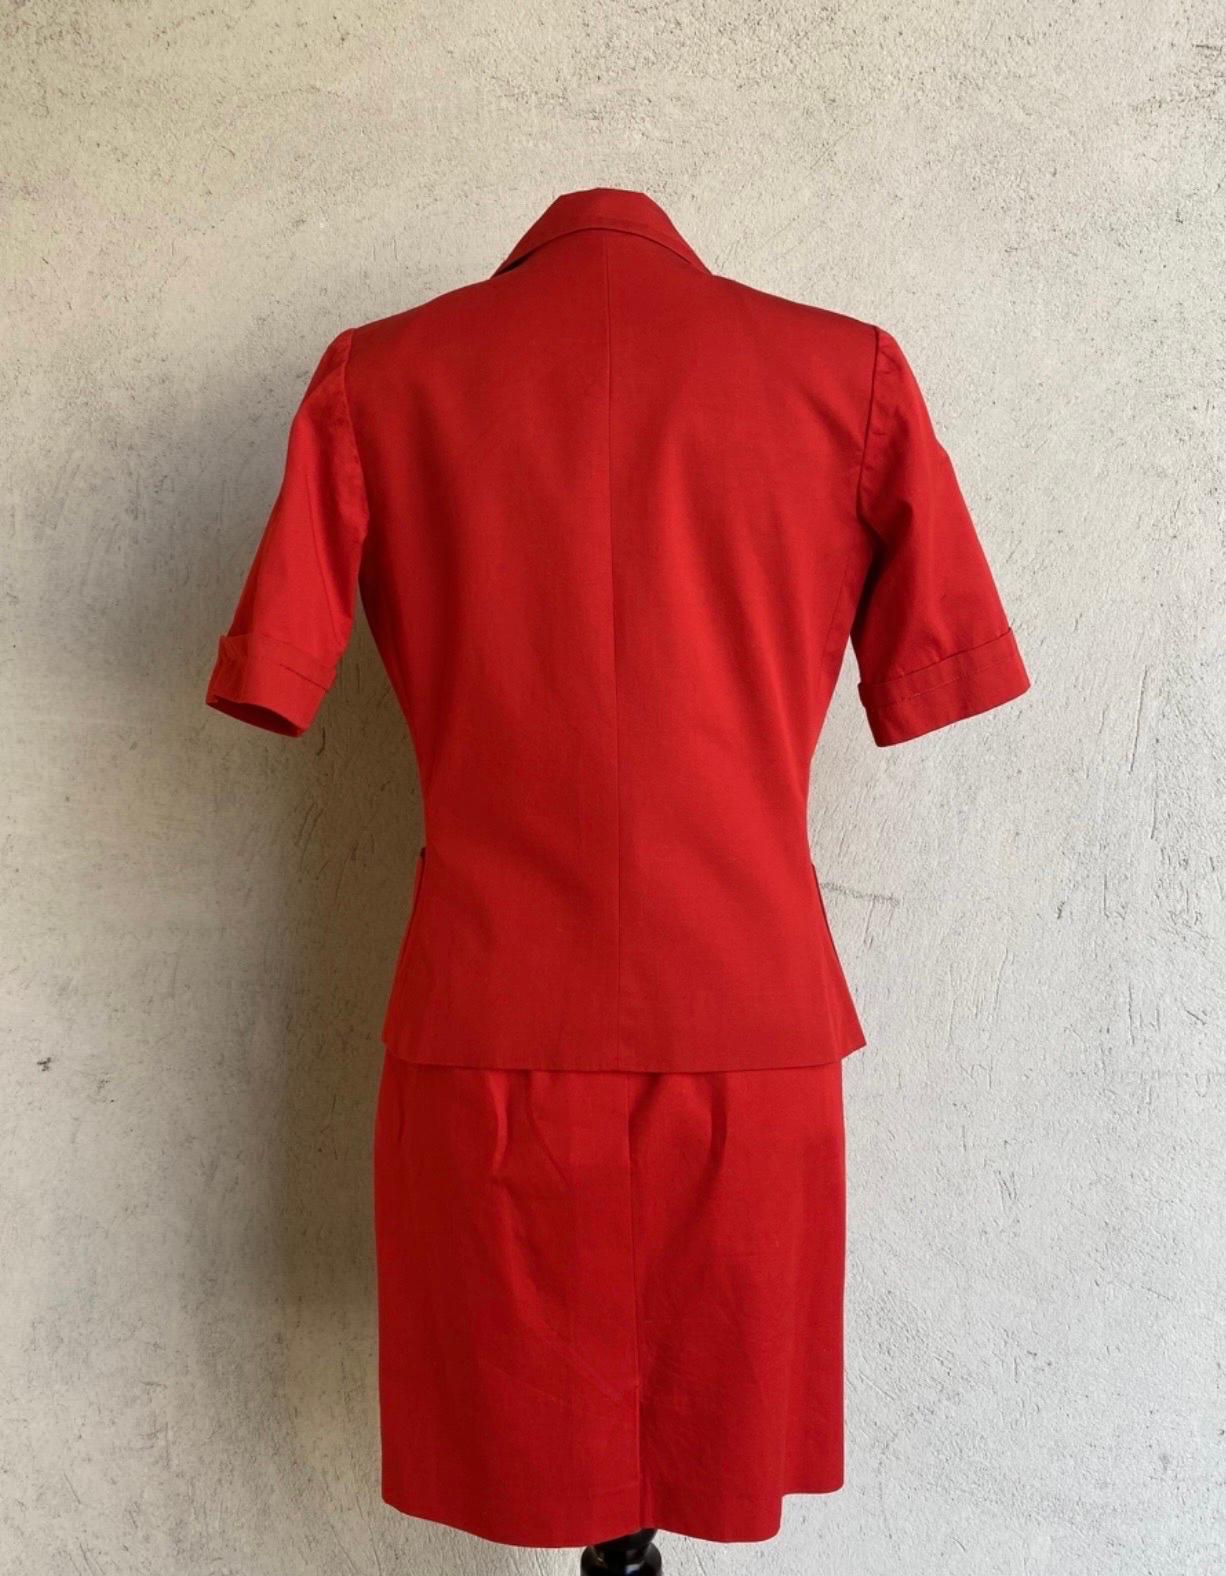 Yves Saint Laurent Vintage red Suit In Excellent Condition For Sale In Carnate, IT